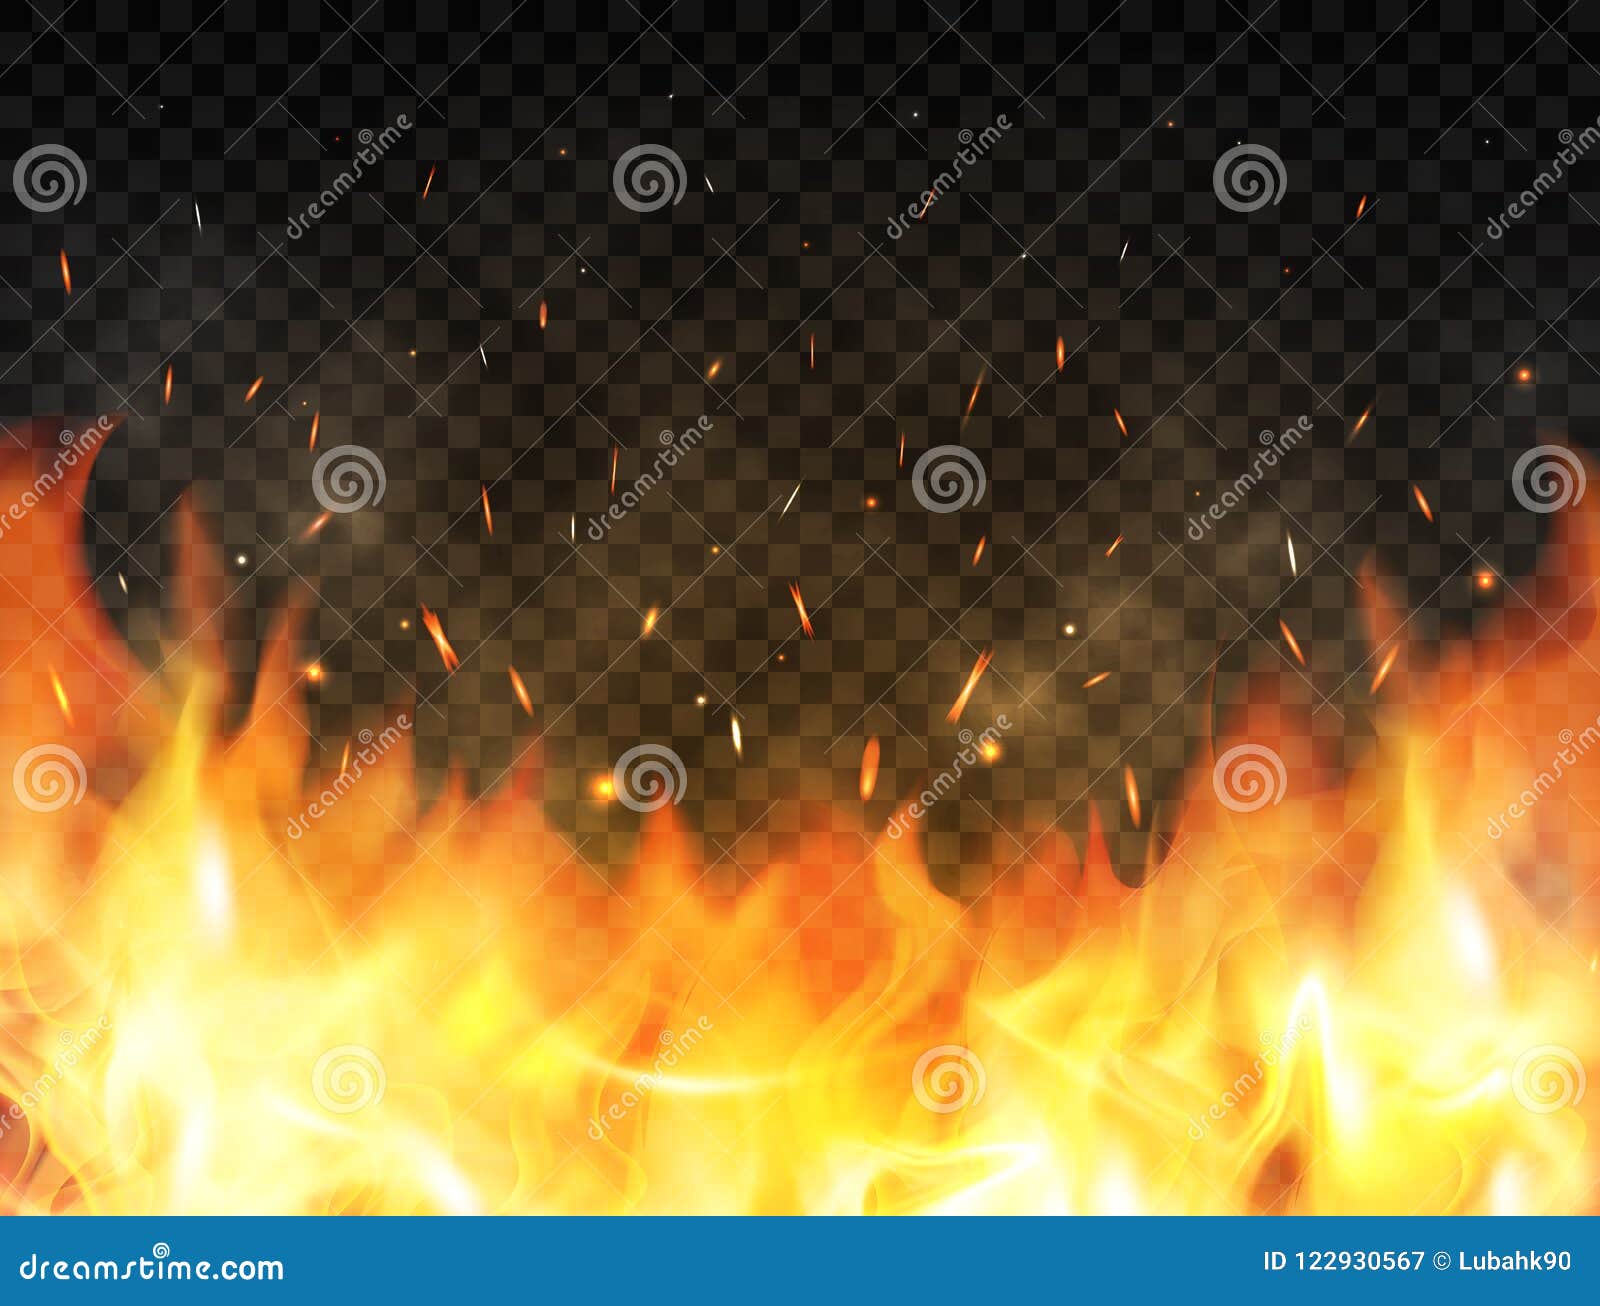 realistic flames on transparent background. fire background with flames, red fire sparks flying up, glowing particles